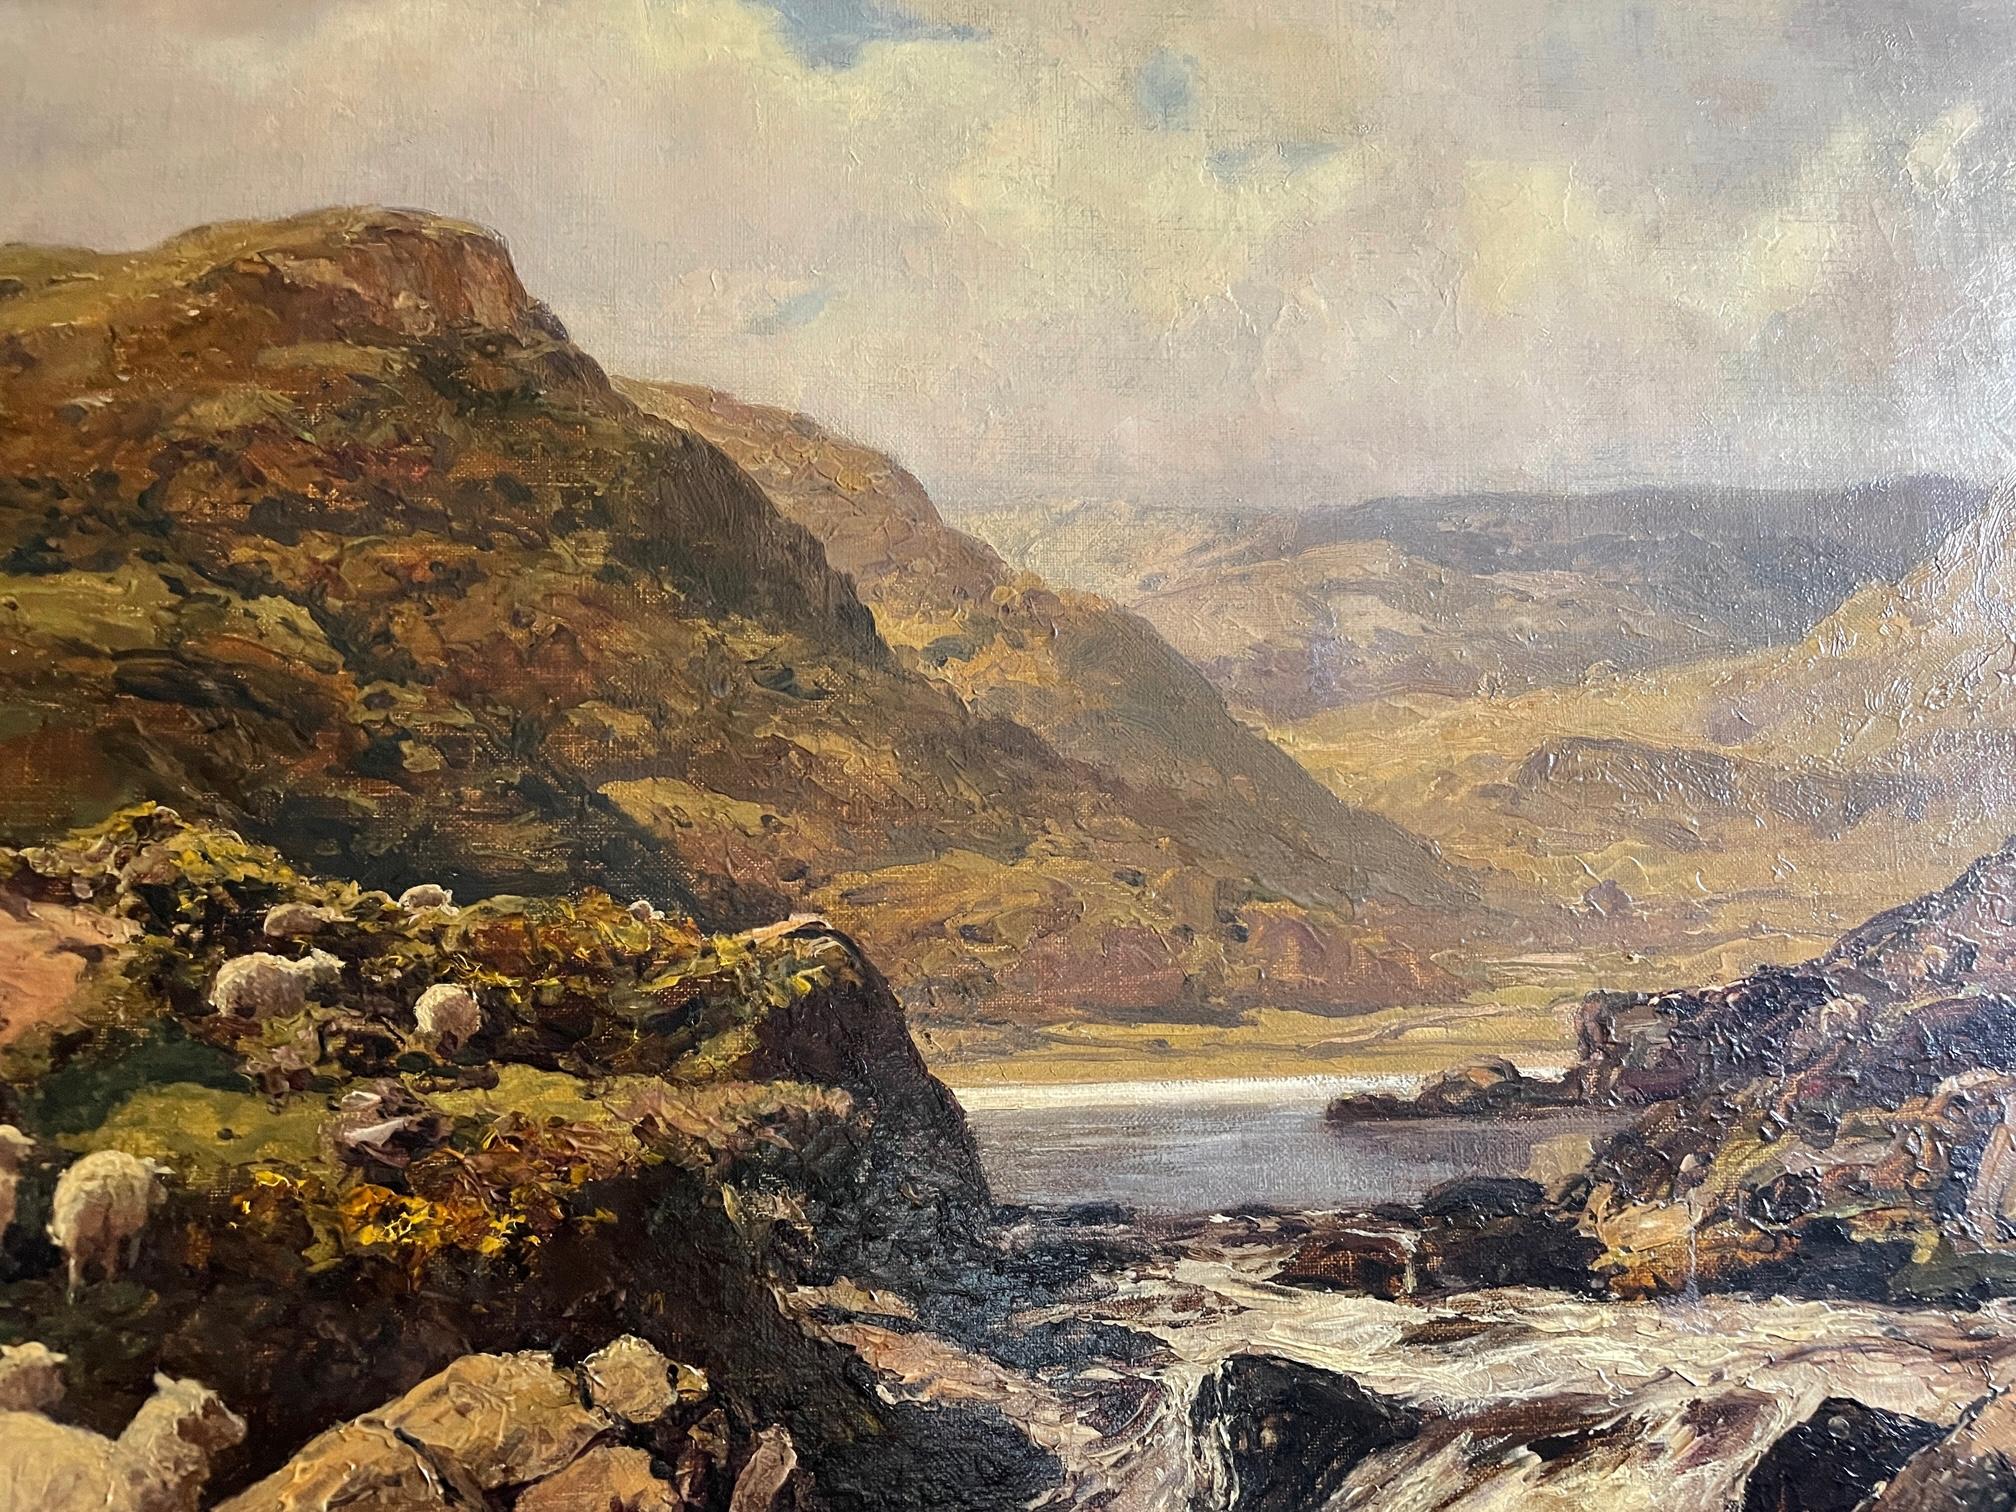 Fine landscape painting, this oil on canvas of Snowdonia,  Wales is by 19th century British artist Thomas Huson, RI, (1844-1920).  Signed by artist in lower left, Thomas Huson was a member of the Royal Institute of Oil Painters, elected in 1883.